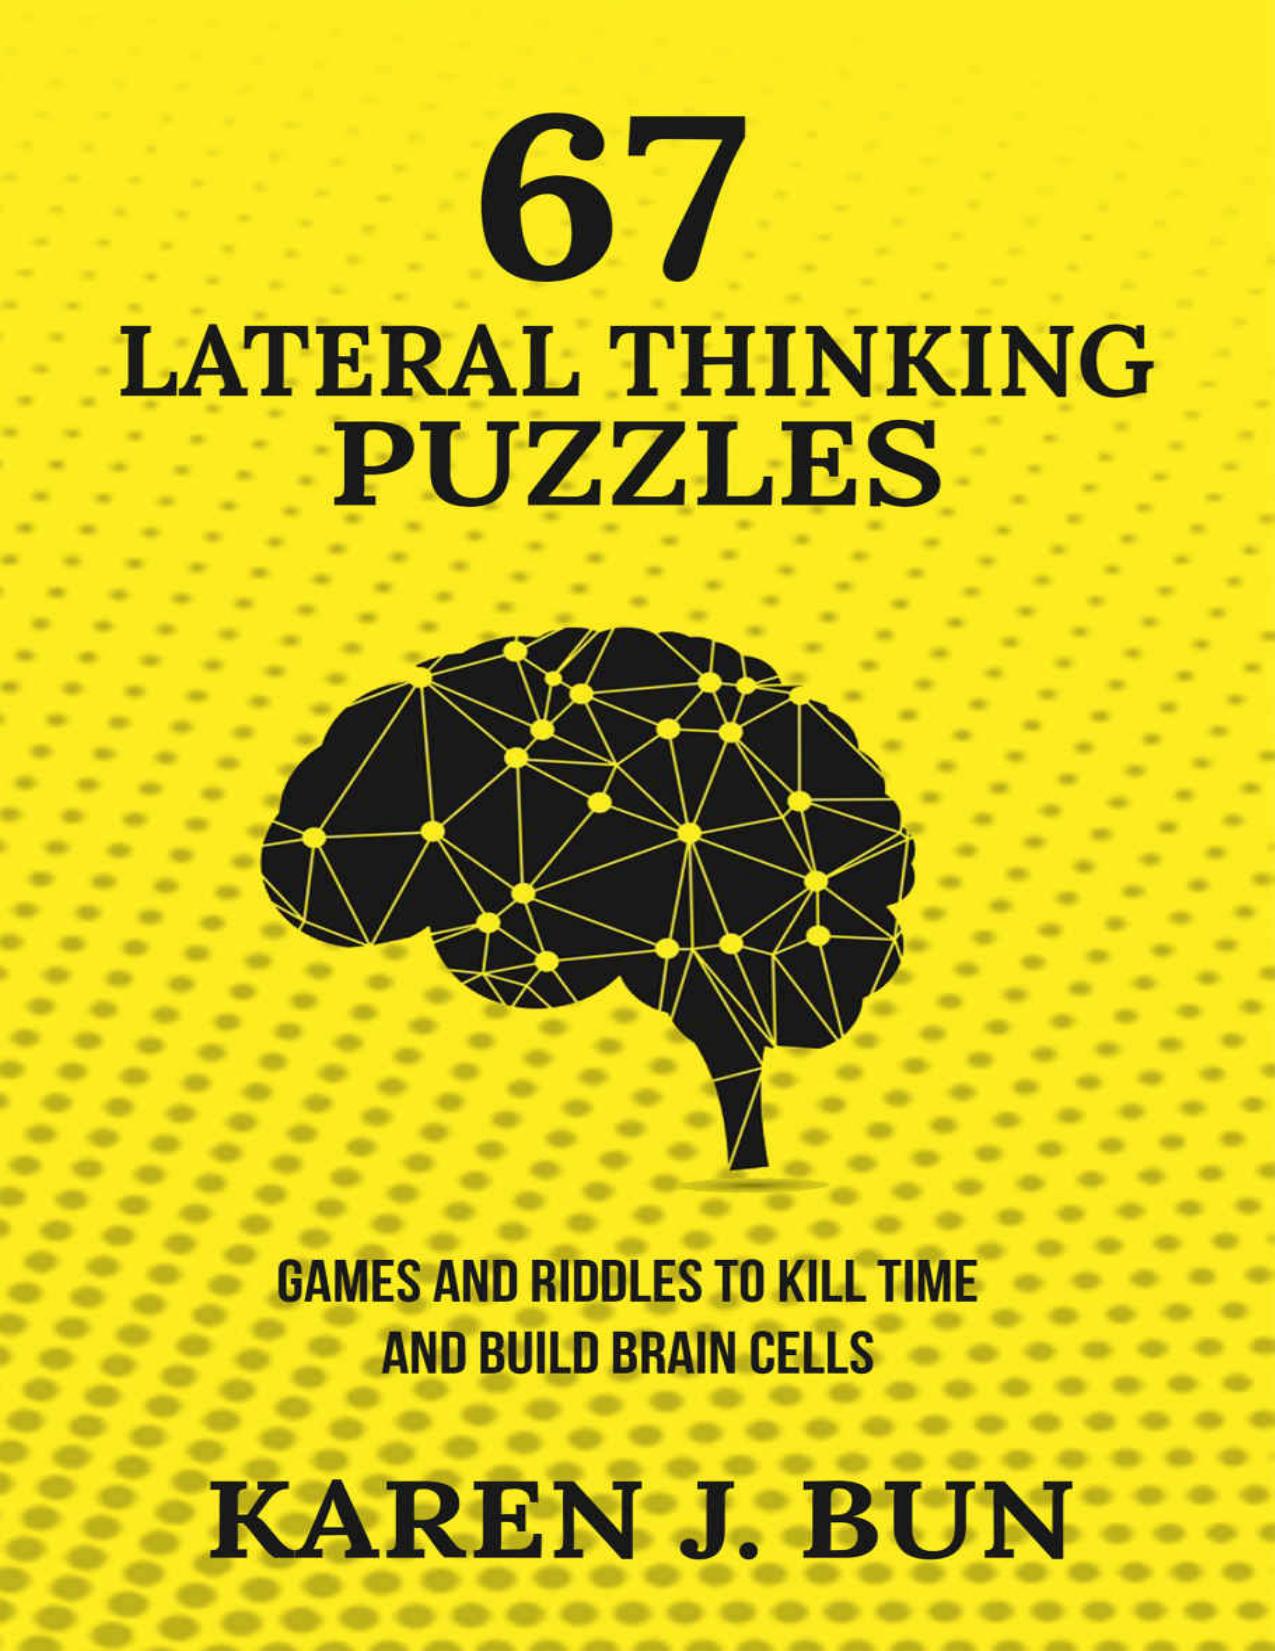 67 Lateral Thinking Puzzles: Games And Riddles To Kill Time And Build Brain Cells by Karen J. Bun